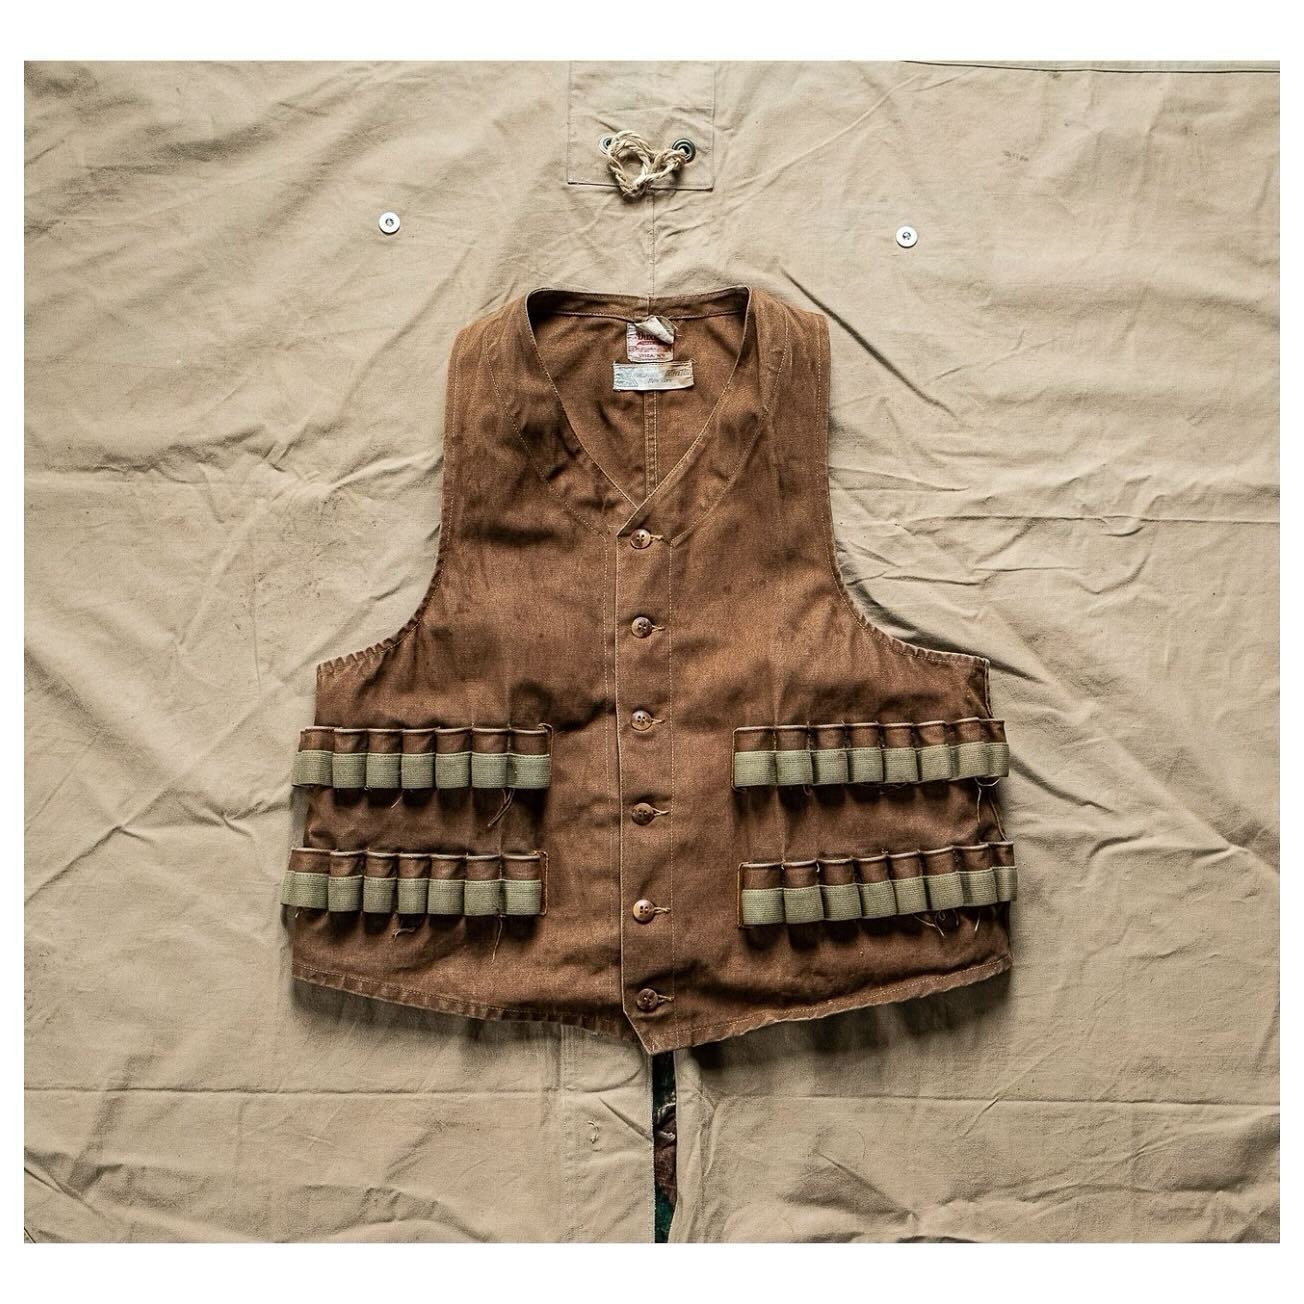 For Sale. A very early (1920&rsquo;s) Canvas Shotgun Shell Hunting Vest from the American hunting-wear masters at Utica Duxbak. 

Available now, along with a heap of other rare outerwear at Saundersmilitaria.com

2nd slide borrowed courtesy of @barek